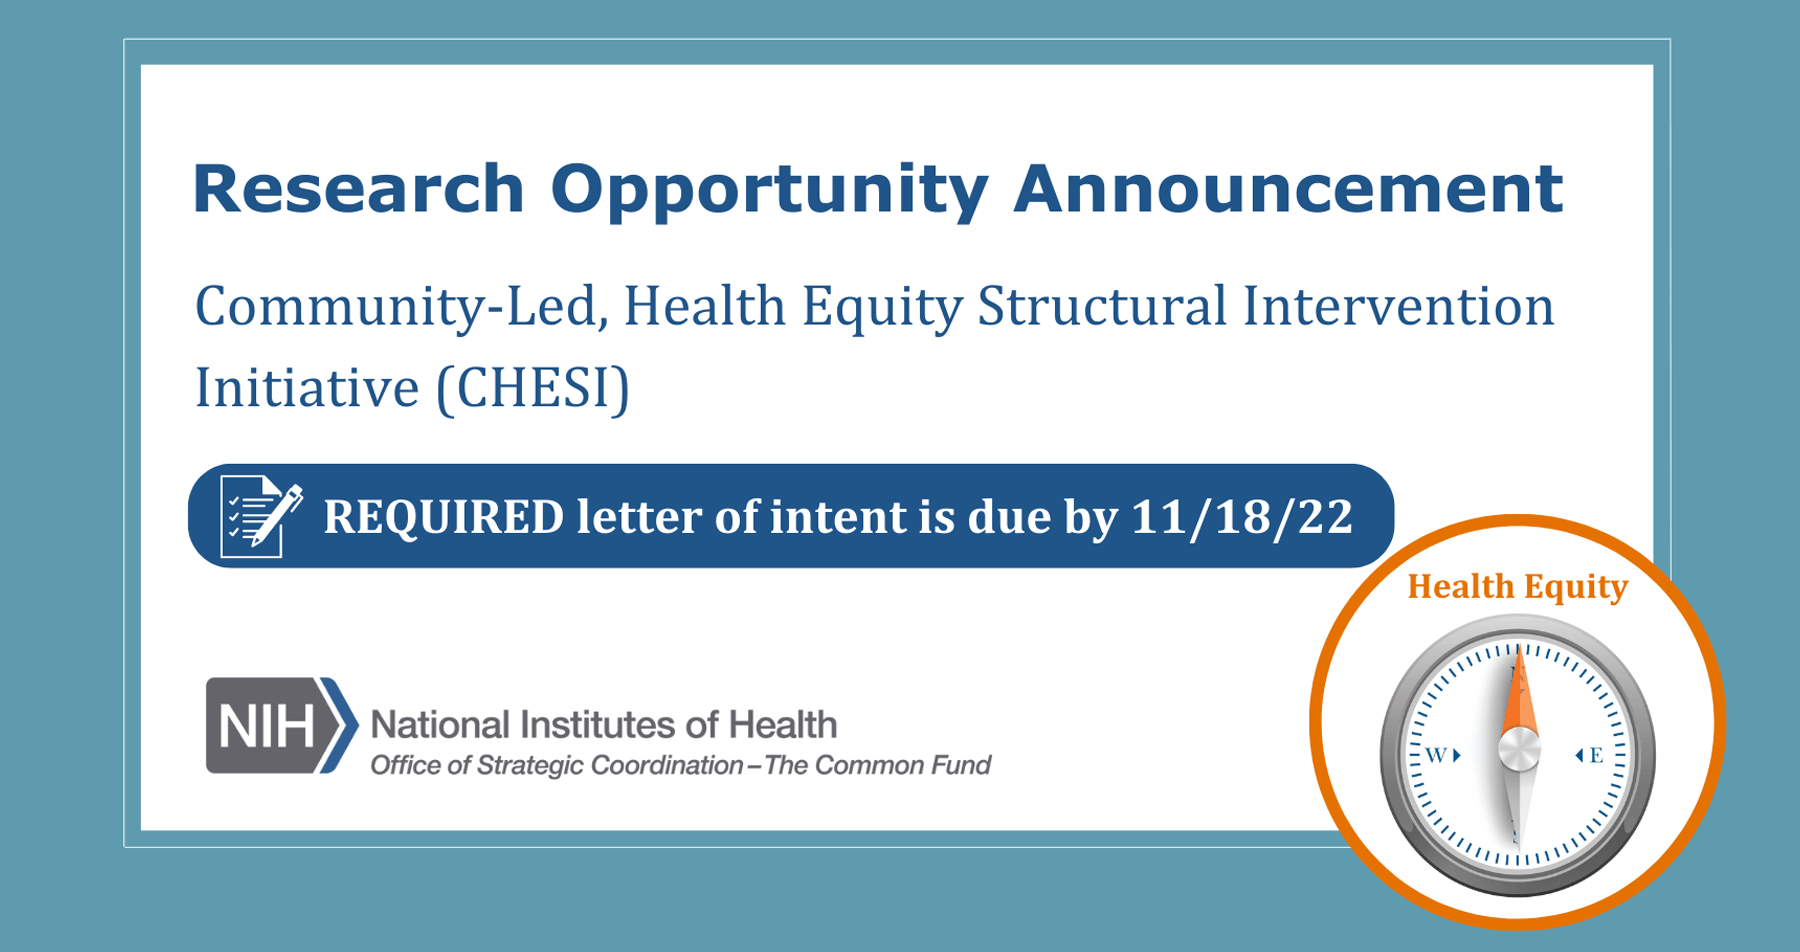 NIH Common Fund’s ComPASS Program Research Opportunity Announcement: Community-Led, Health Equity Structural Intervention Initiative